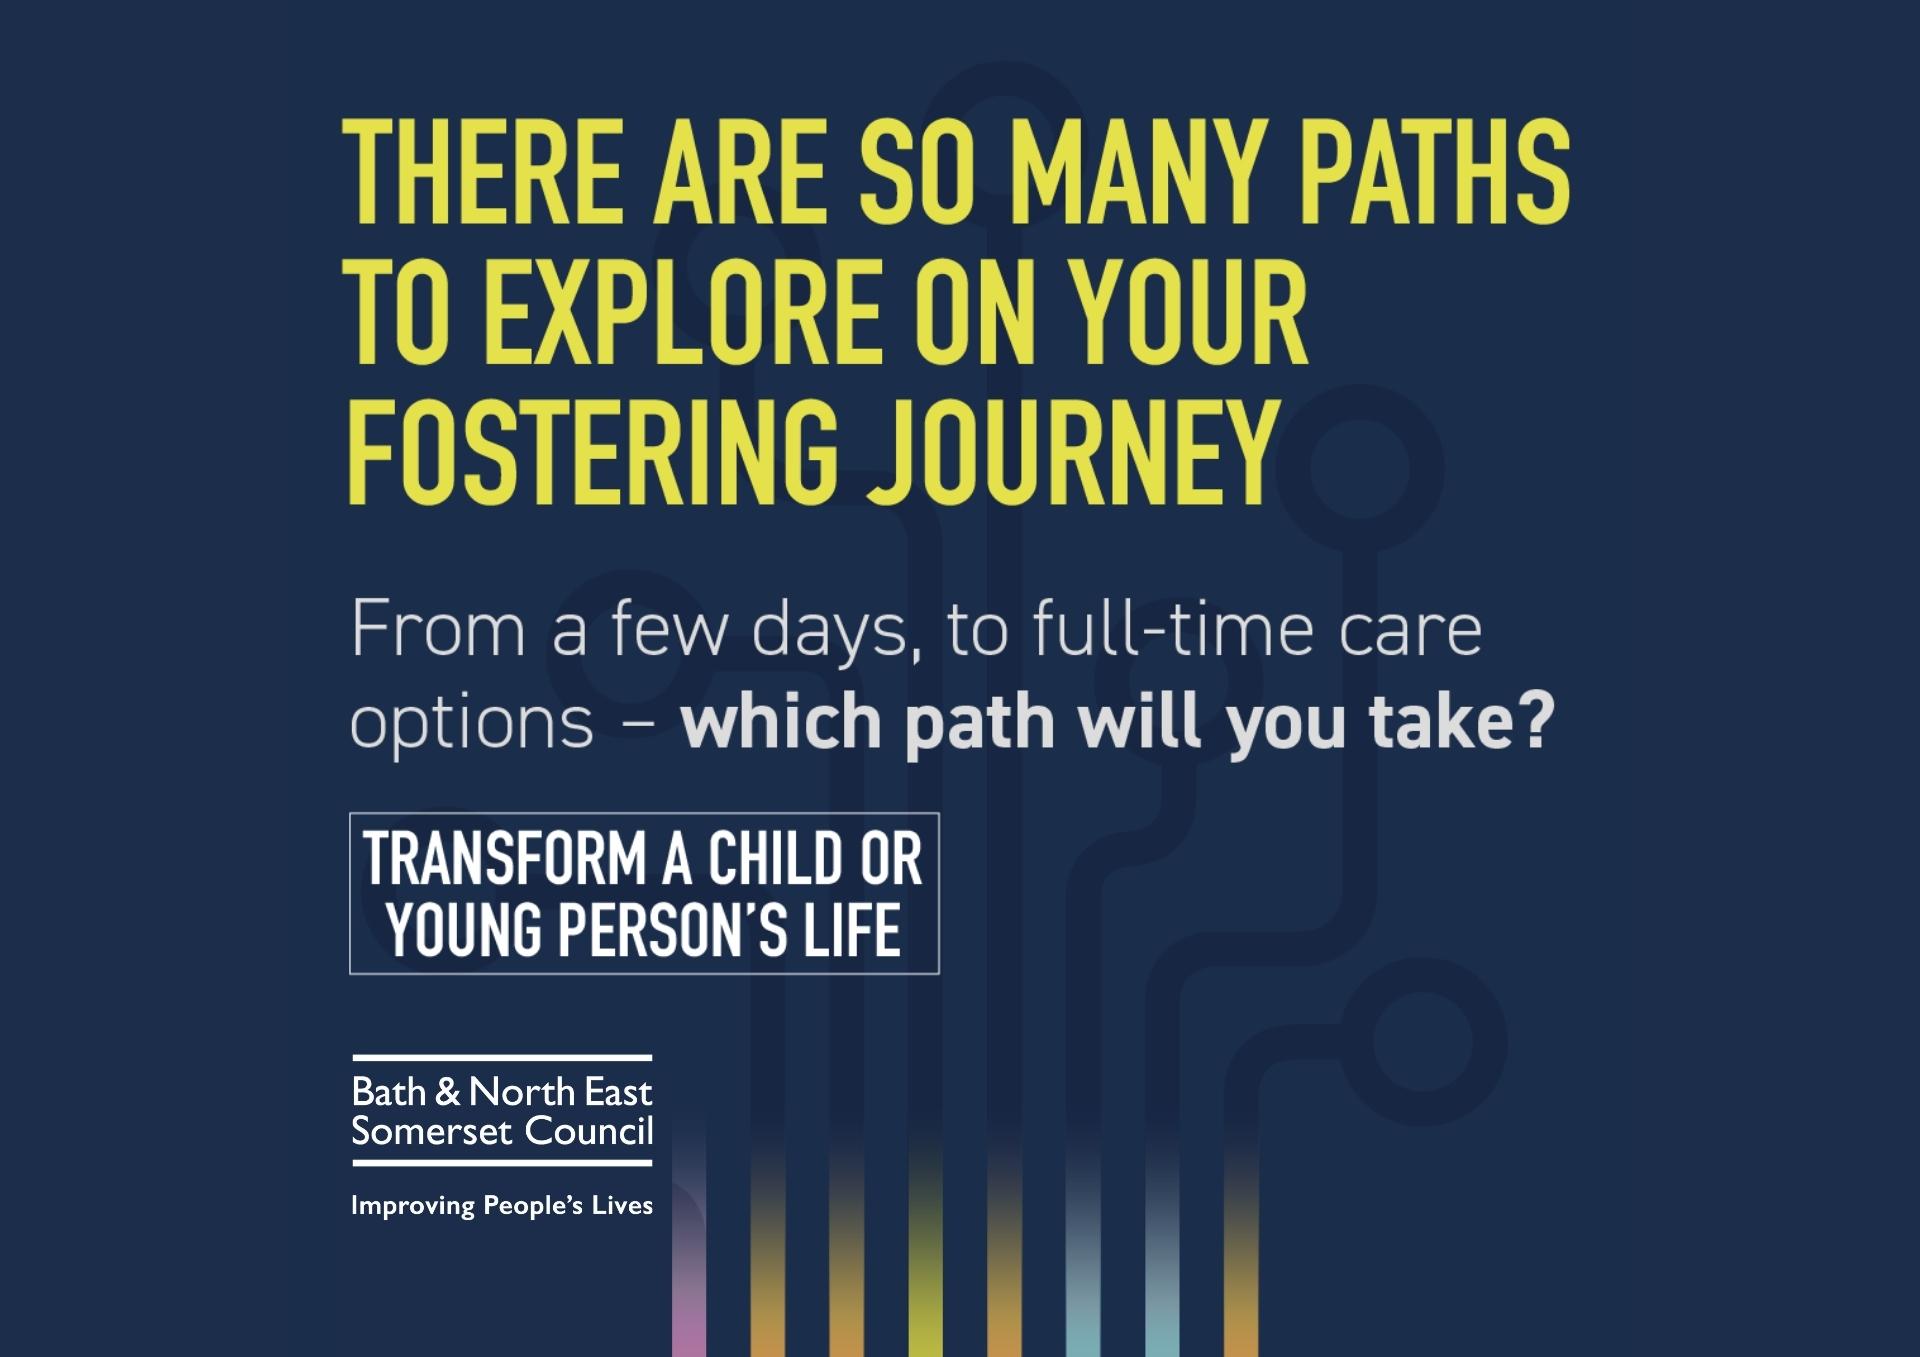 There are so many paths to explore on your fostering journey